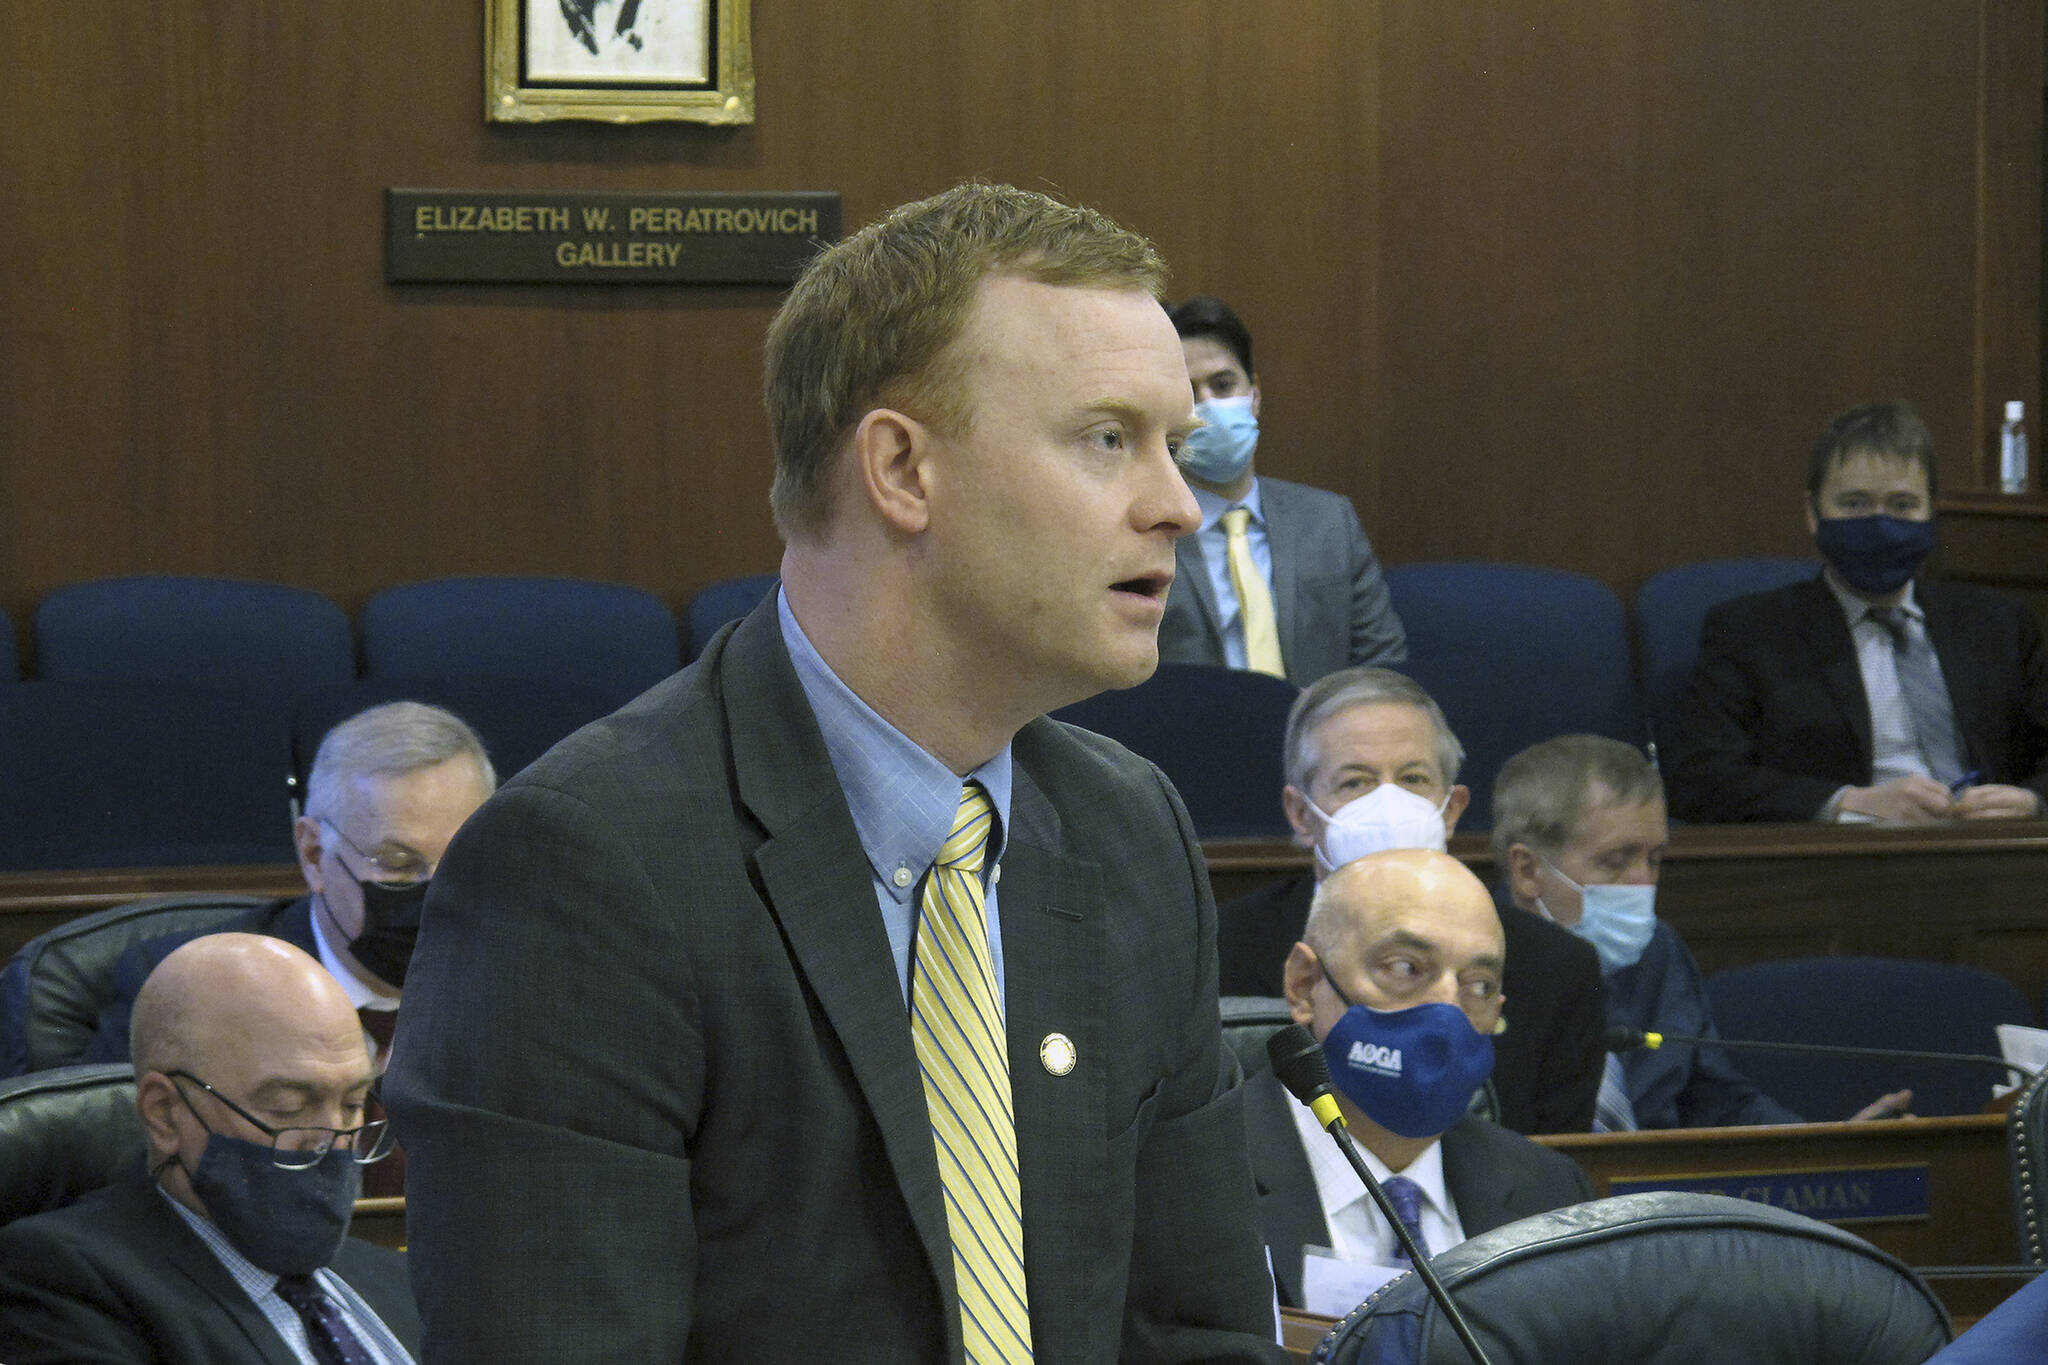 Alaska Republican state Rep. David Eastman speaks on the floor of the Alaska House on Jan. 31, 2022, in Juneau, Alaska. A lawyer said in opening arguments Tuesday, Dec. 13 in a case against Eastman that the Alaska lawmaker is unfit to hold office because he's a member of the far-right Oath Keepers, a group that has either advocated or engaged in concrete action to overthrow the U.S. government. (AP Photo/Becky Bohrer, File)